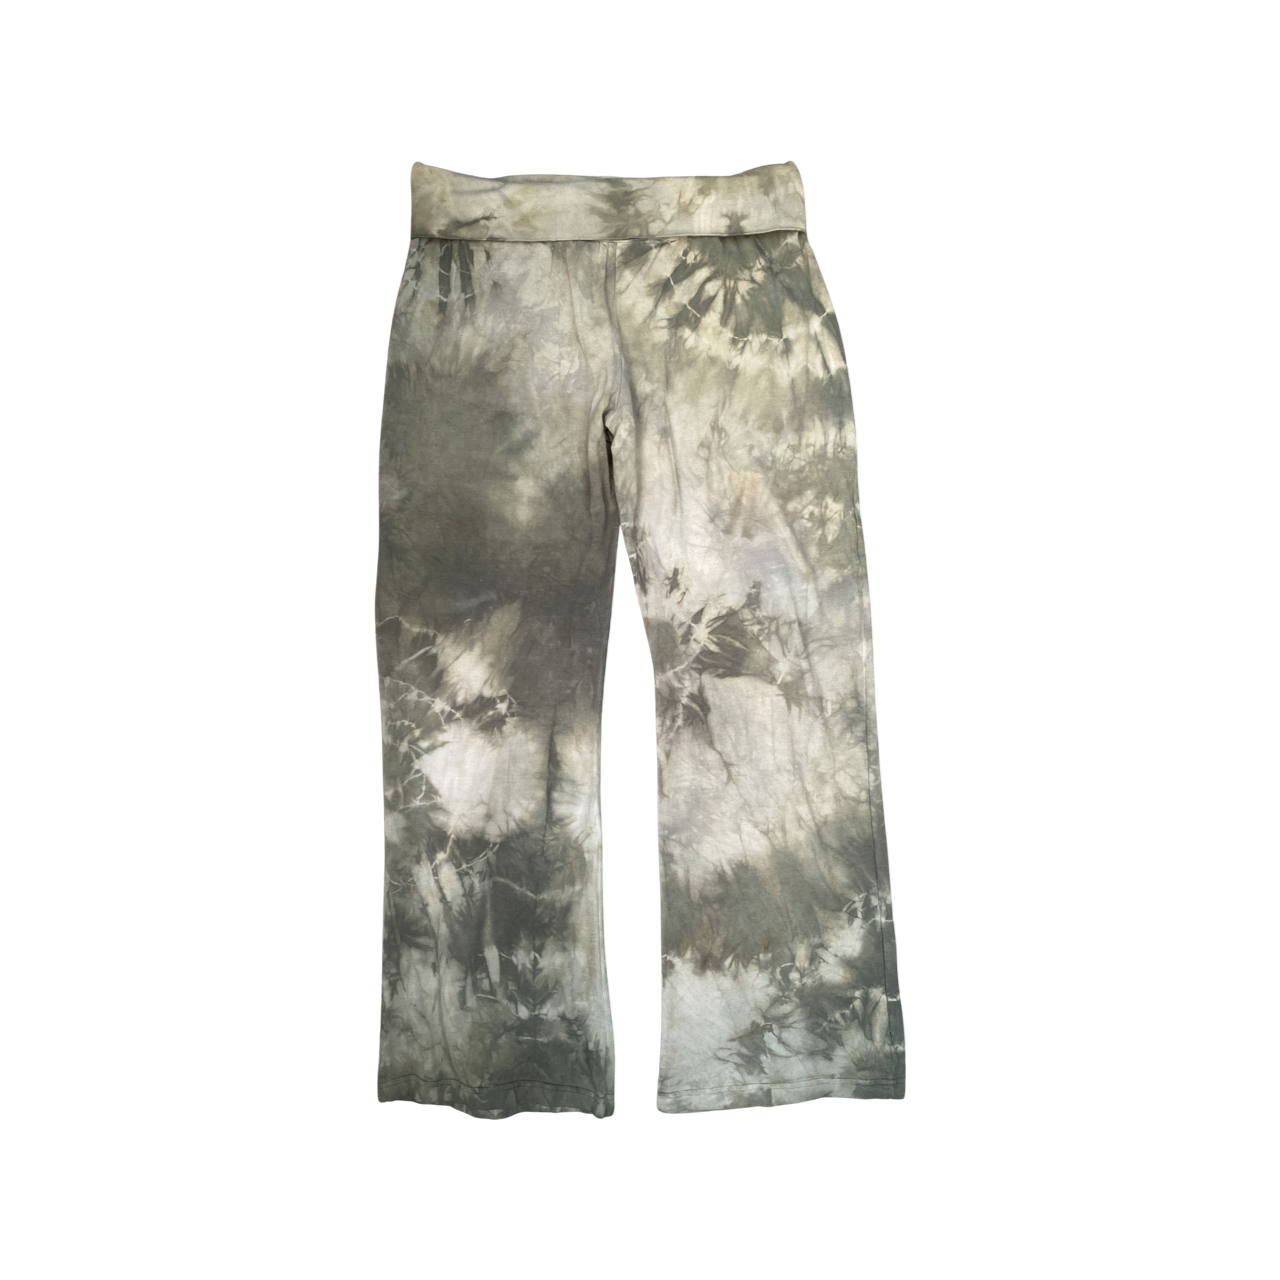 Hand-Dyed Yoga Pants - The Everyday Pant by 1 Life in Olive + Sage